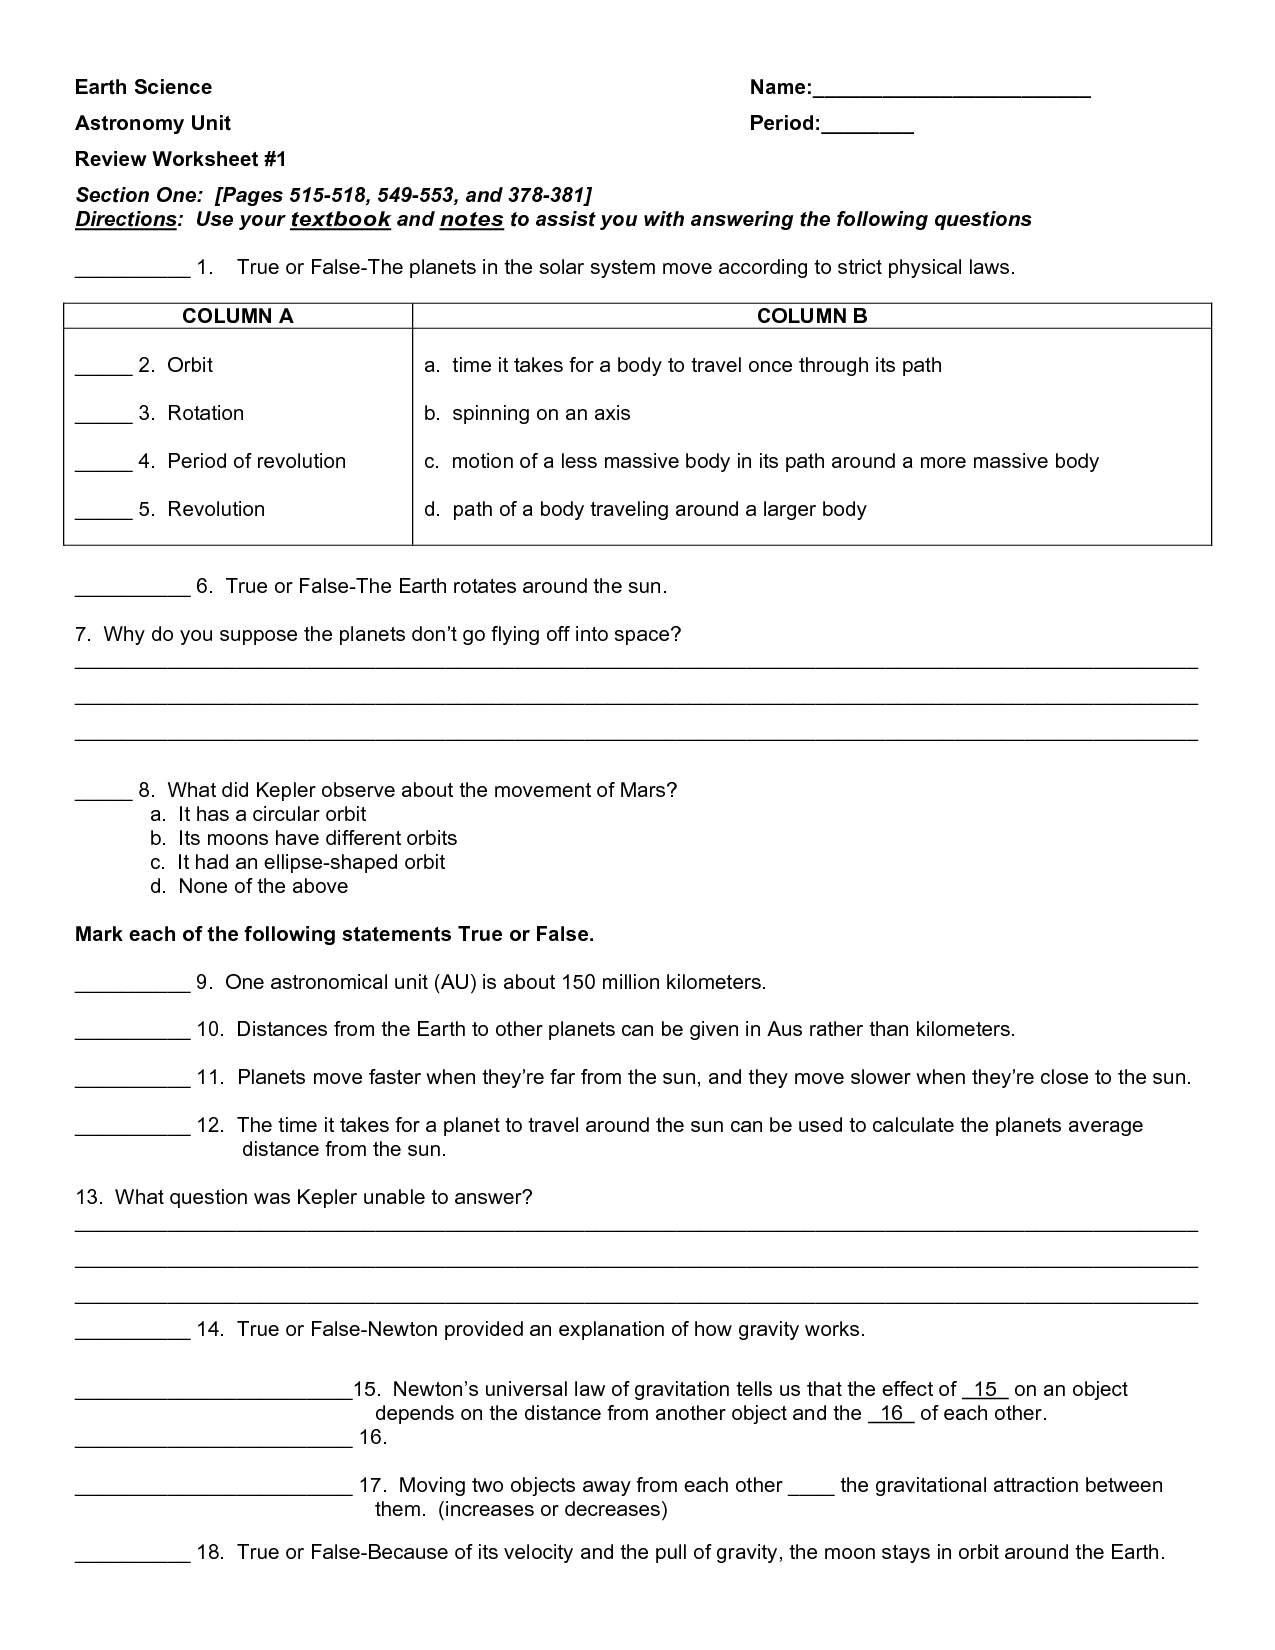 17-best-images-of-middle-school-earth-science-worksheets-earth-science-worksheets-high-school